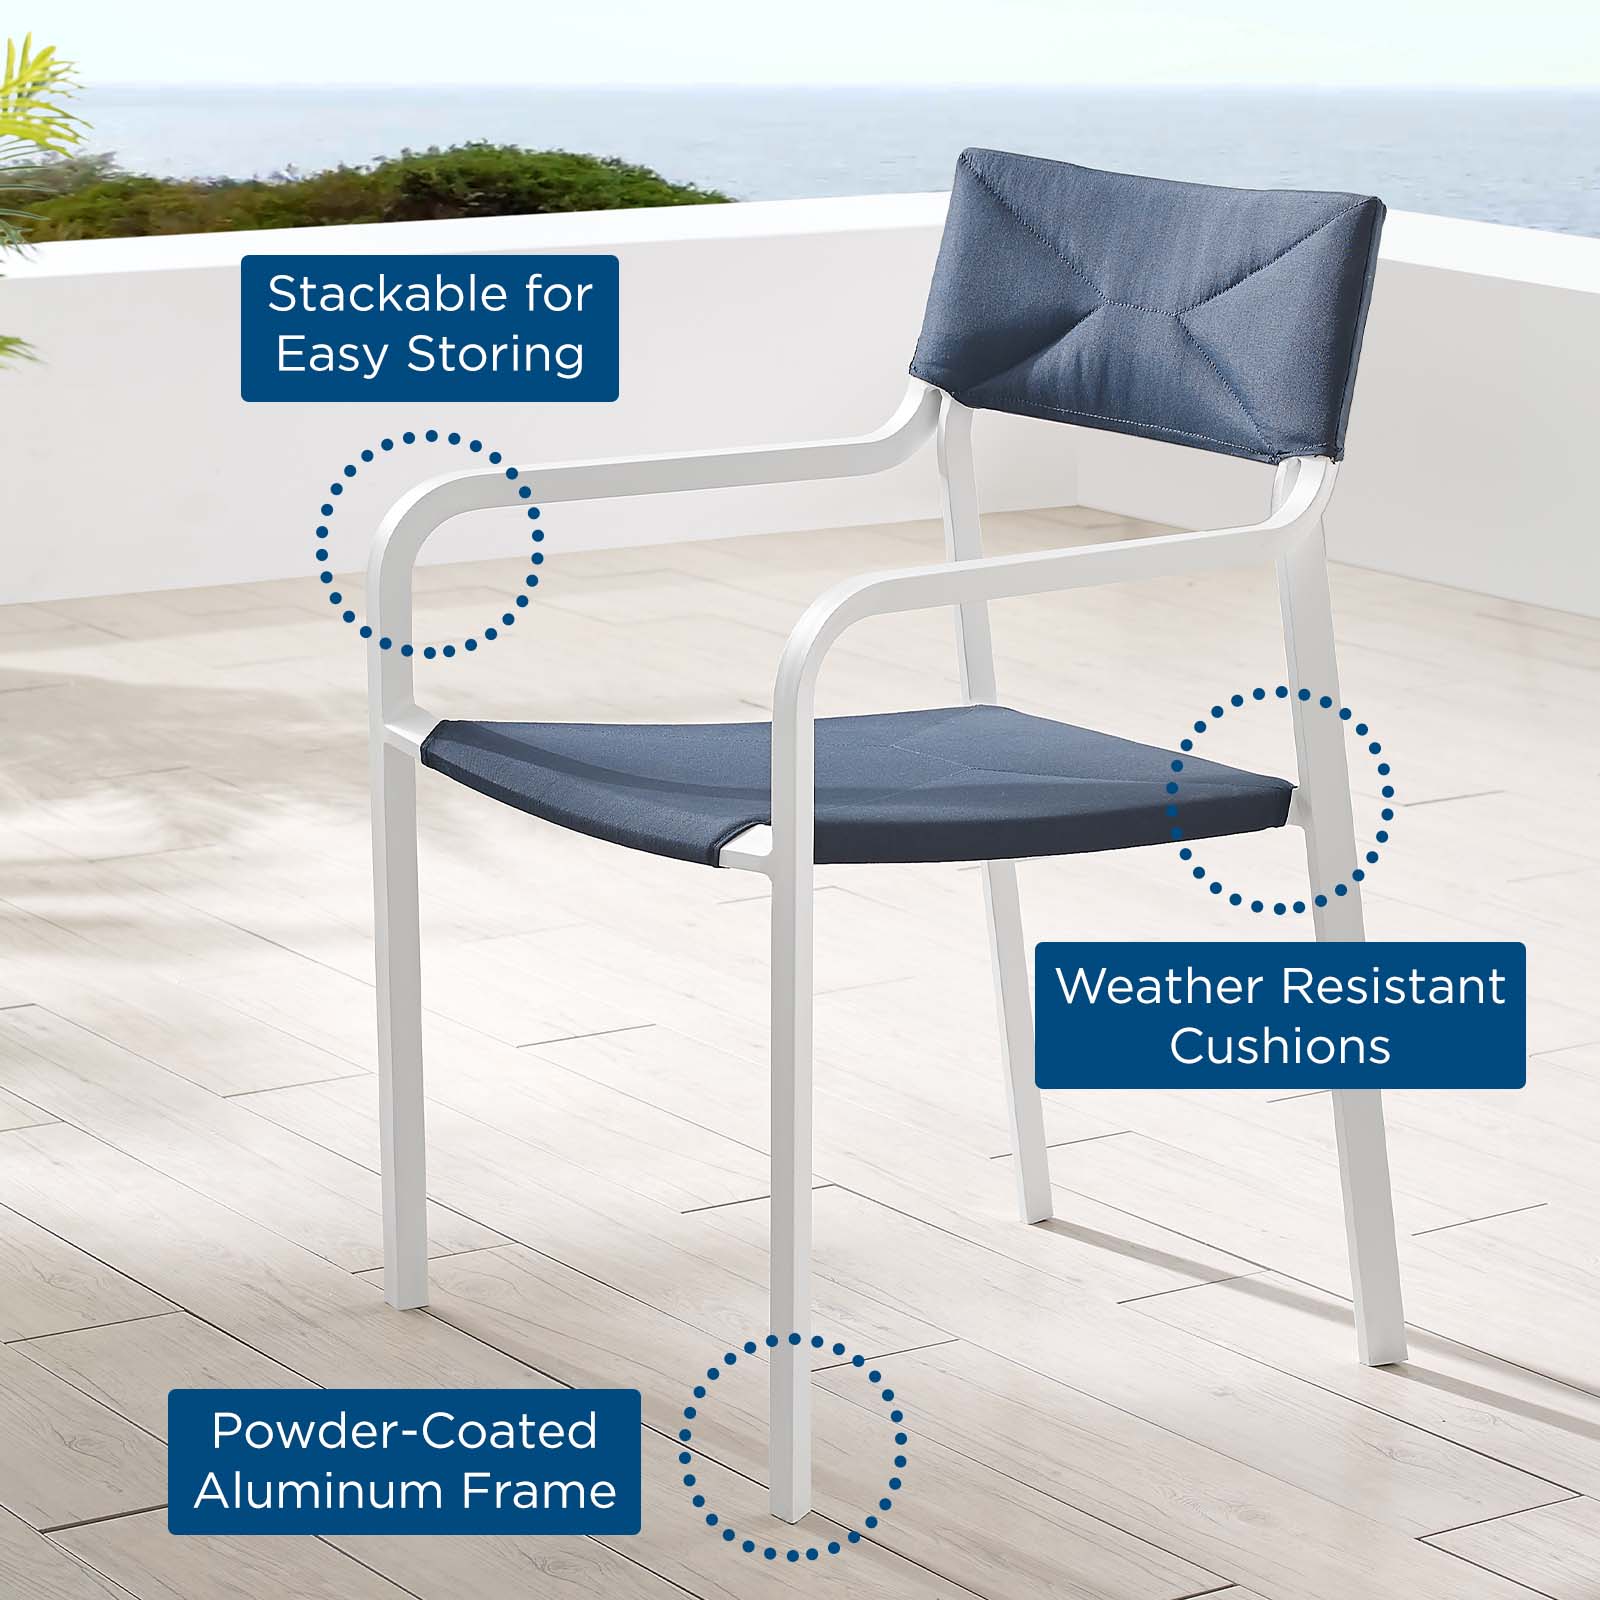 Contemporary Modern Urban Designer Outdoor Patio Balcony Garden Furniture Side Dining Armchair Chair, Fabric Aluminum, Navy Blue White - image 2 of 6